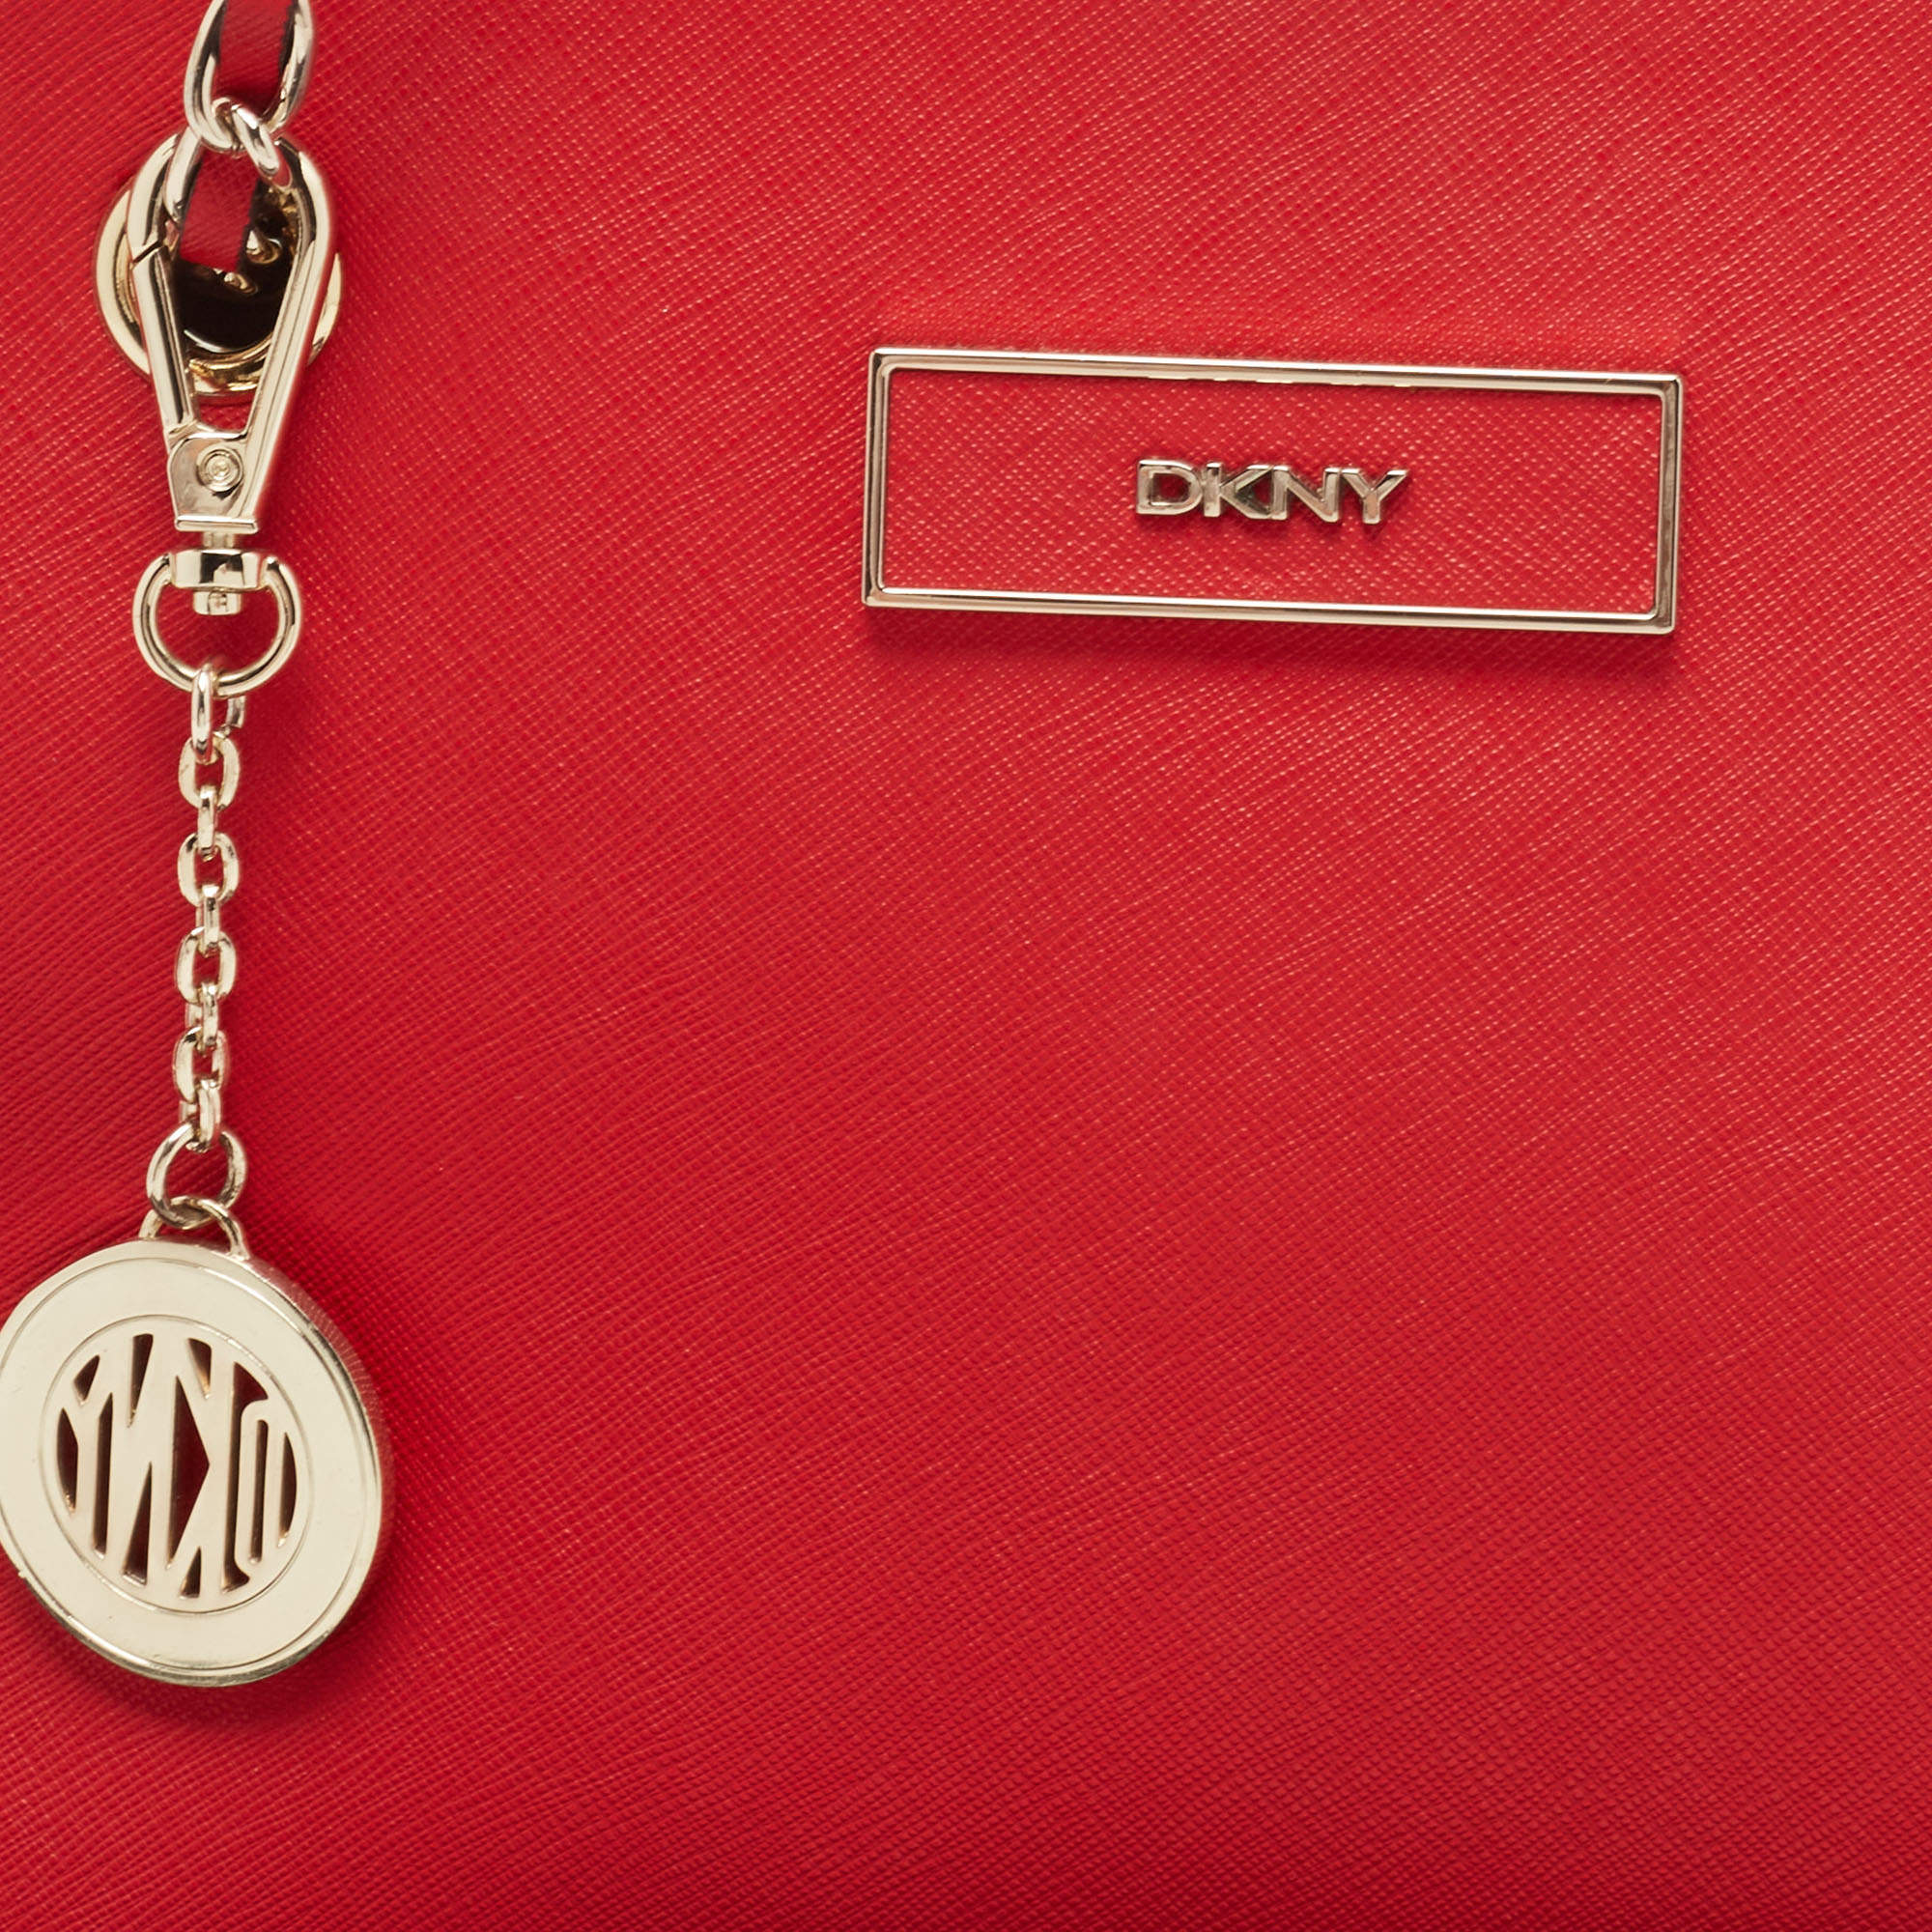 DKNY Red Leather Flap Chain Shoulder Bag Dkny | The Luxury Closet